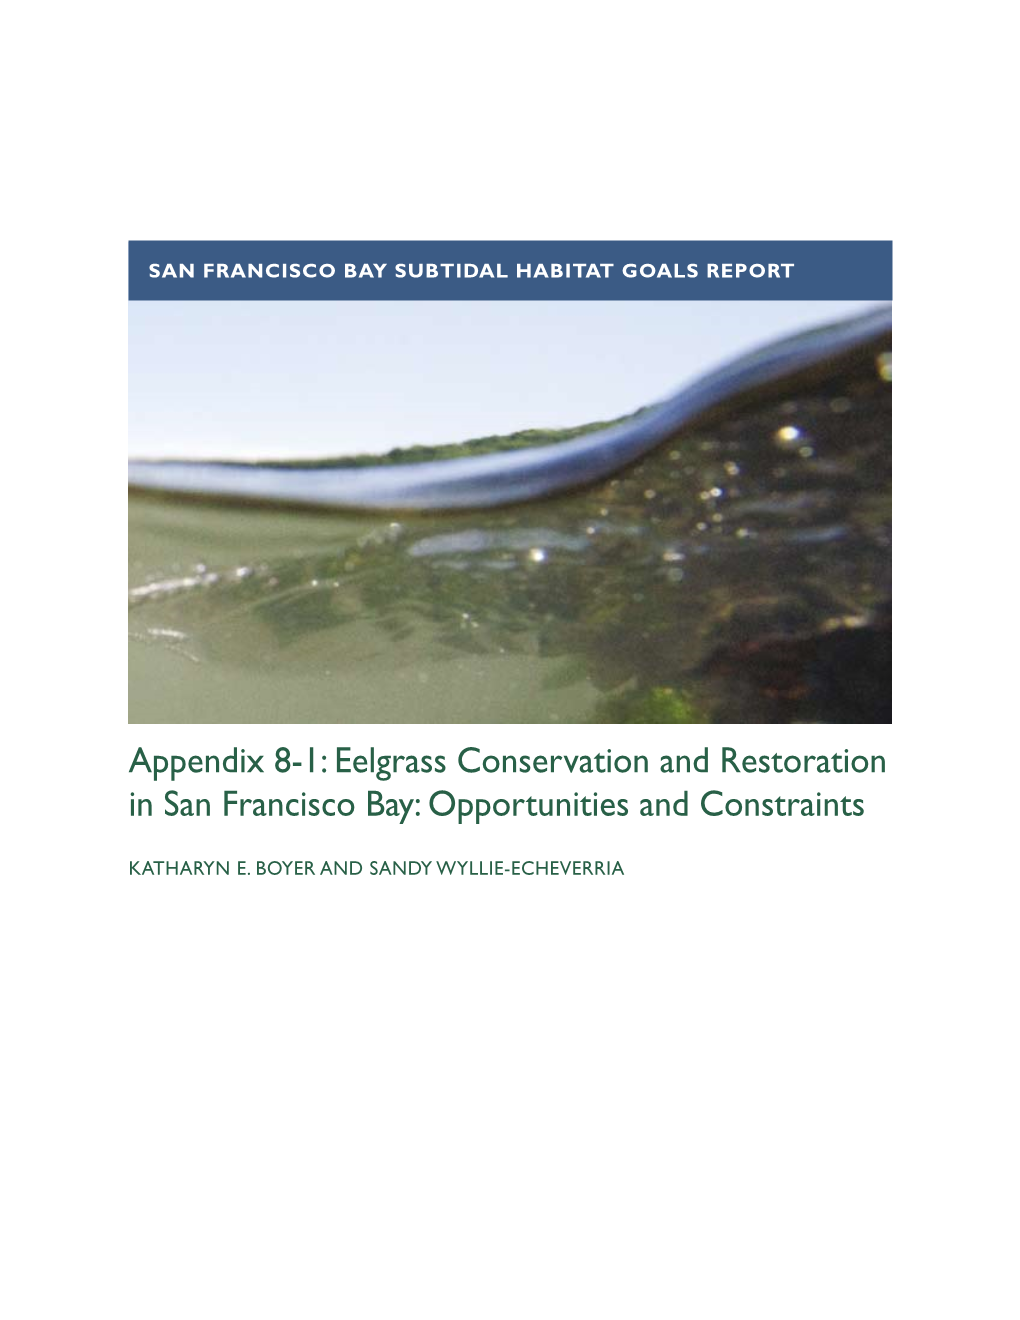 Appendix 8-1: Eelgrass Conservation and Restoration in San Francisco Bay: Opportunities and Constraints